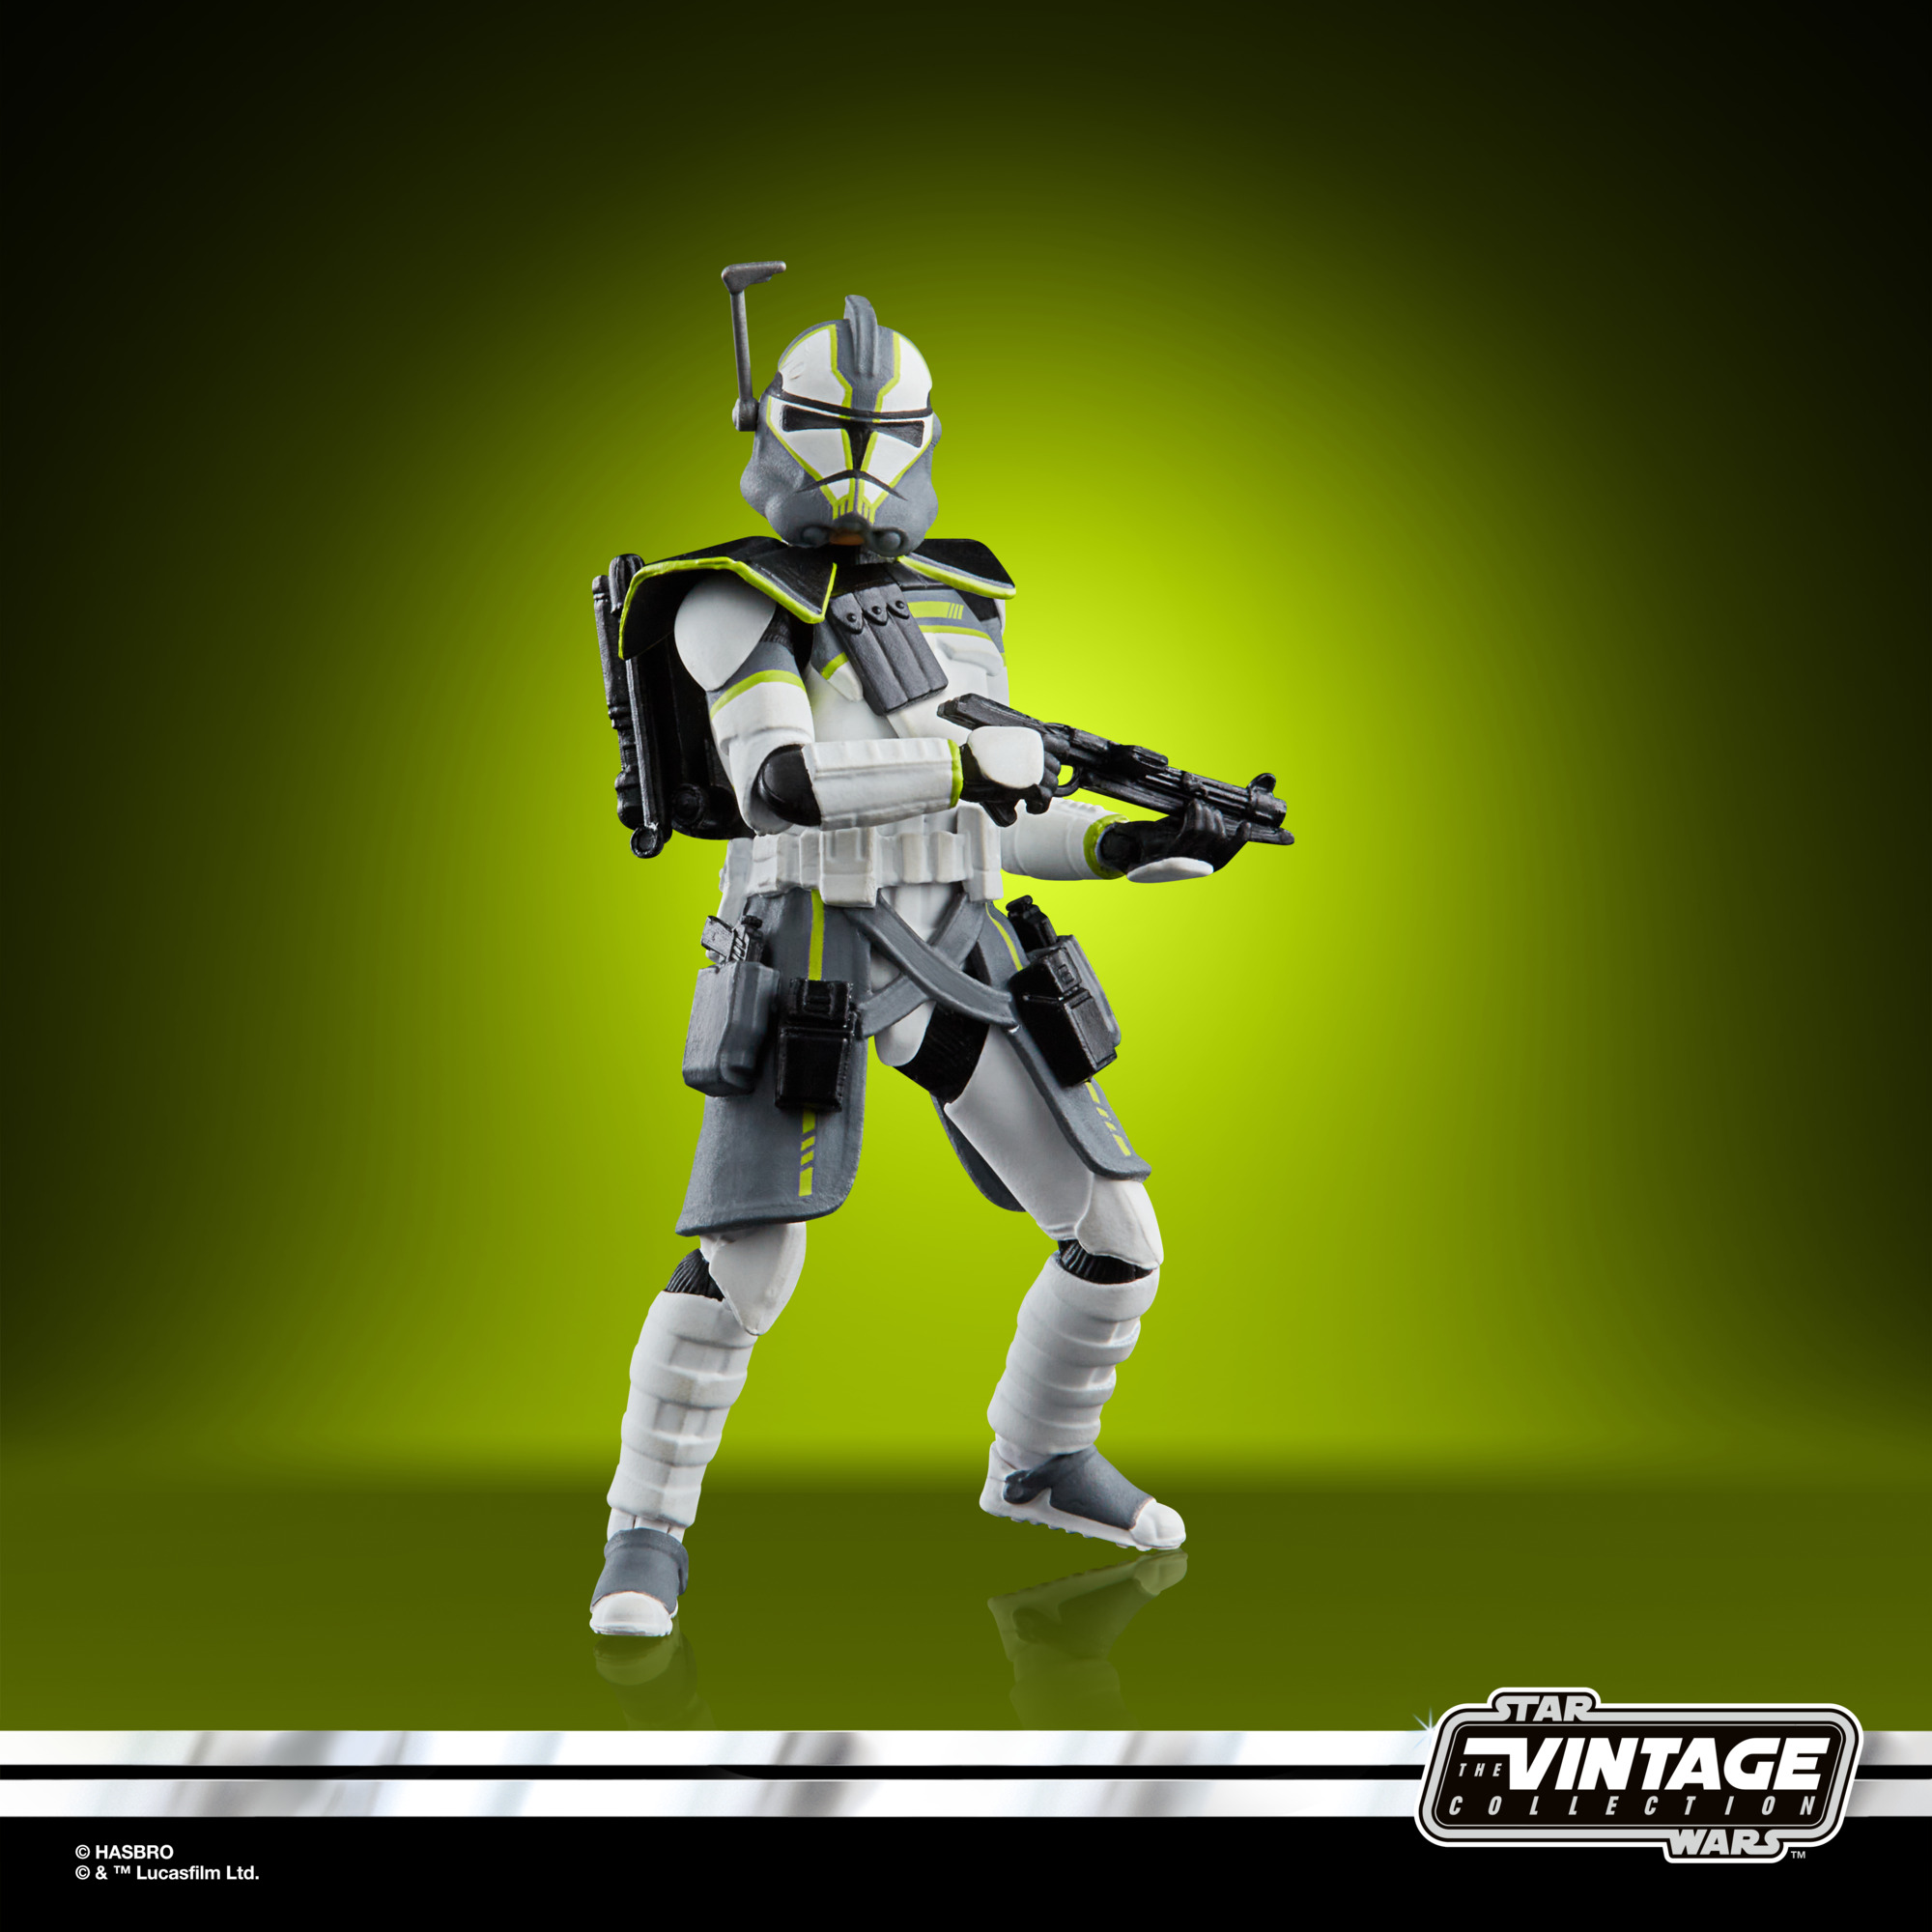 Star Wars The Vintage Collection Gaming Greats ARC Trooper (Lambent Seeker) F62545L0 5010994151560